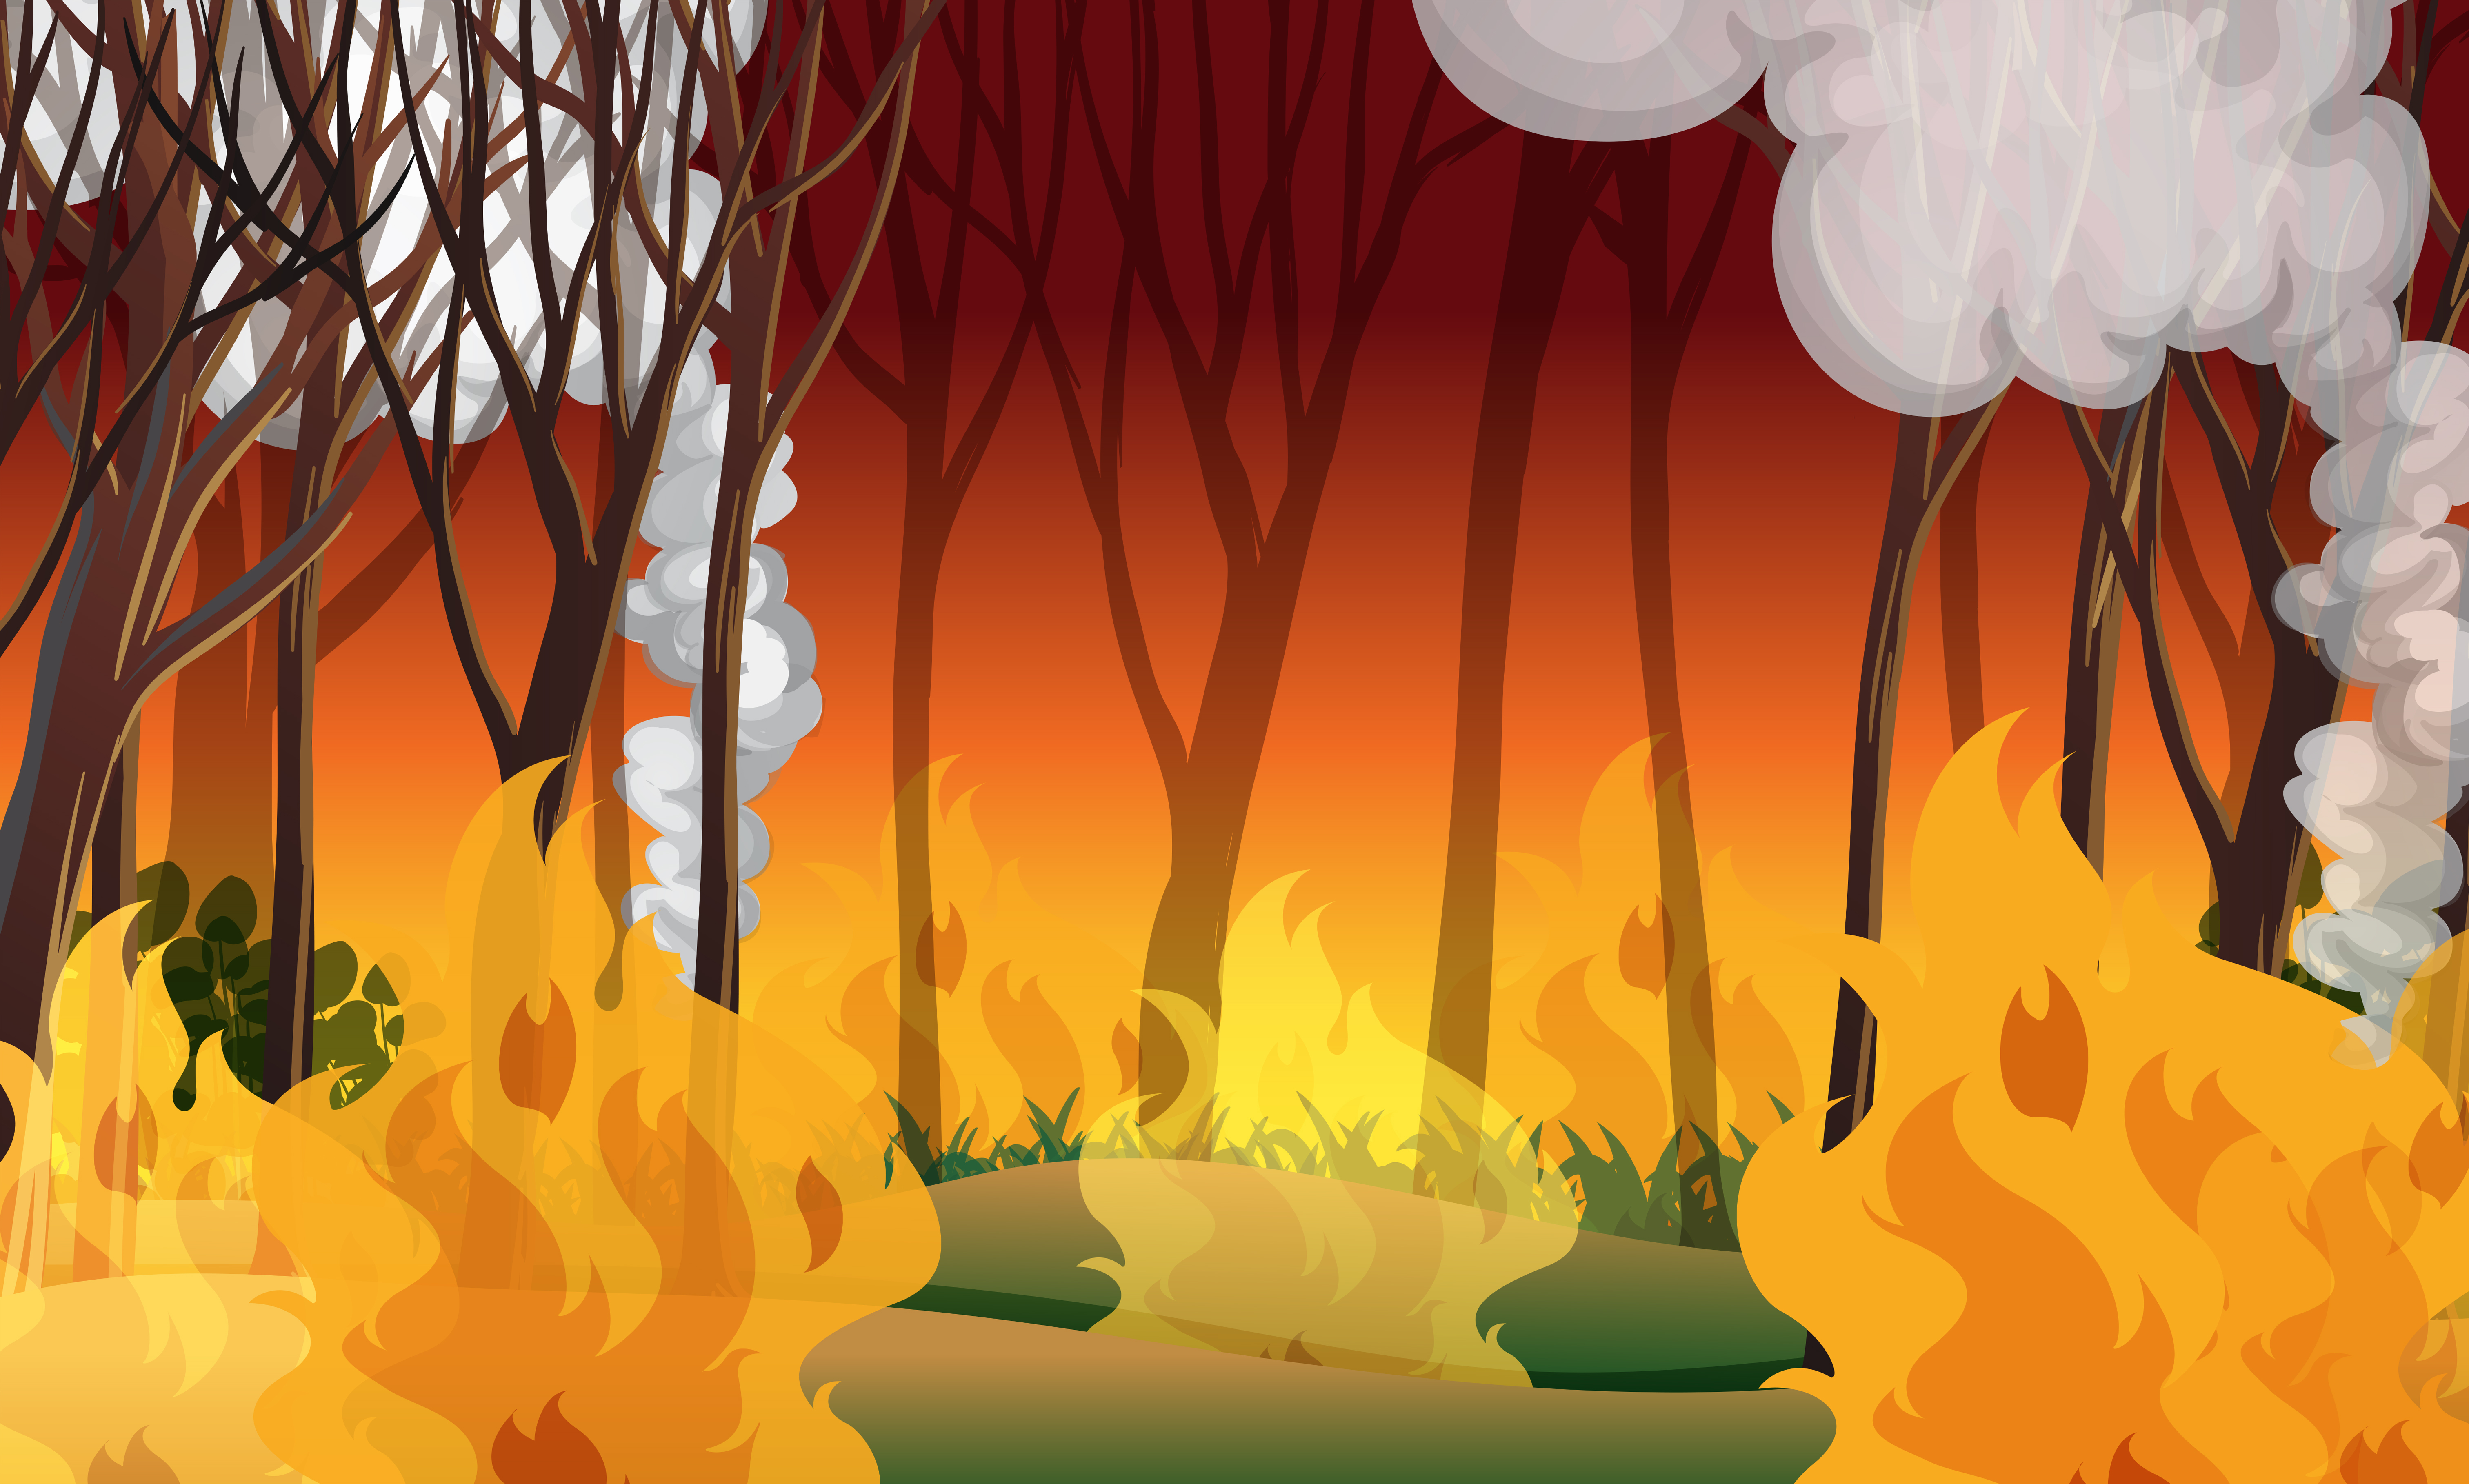 A wildfire disaster landscape 375983 - Download Free Vectors, Clipart